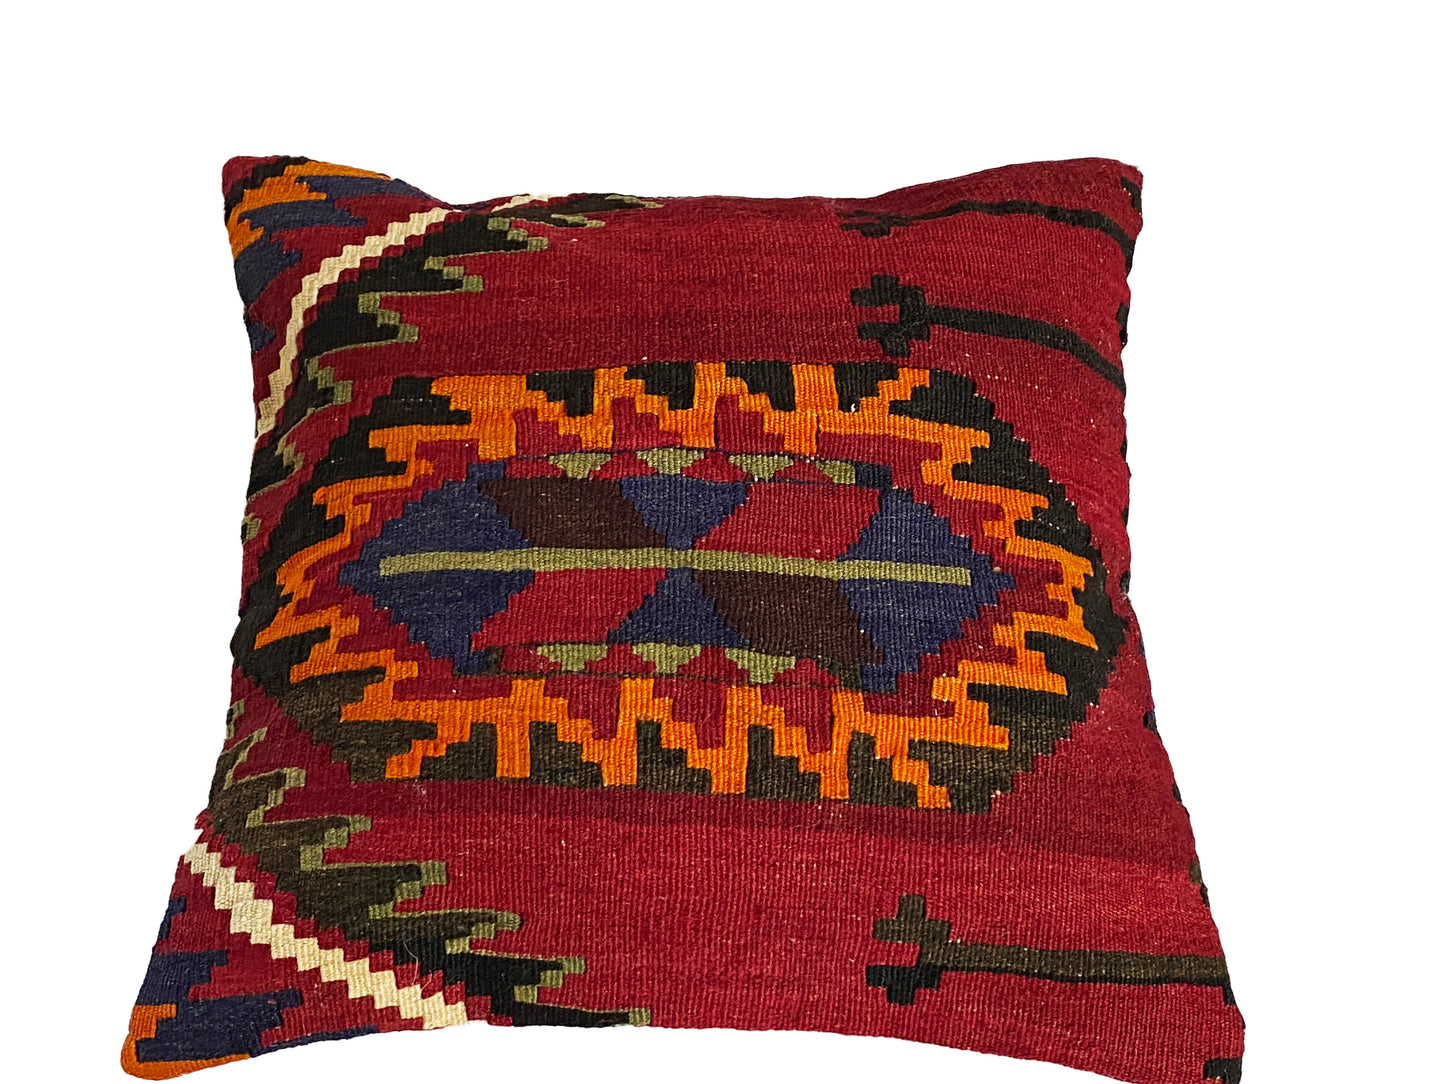 #4352 Superb Old  Tribal Turkish Kilim Pillow Cover 16 by 16"